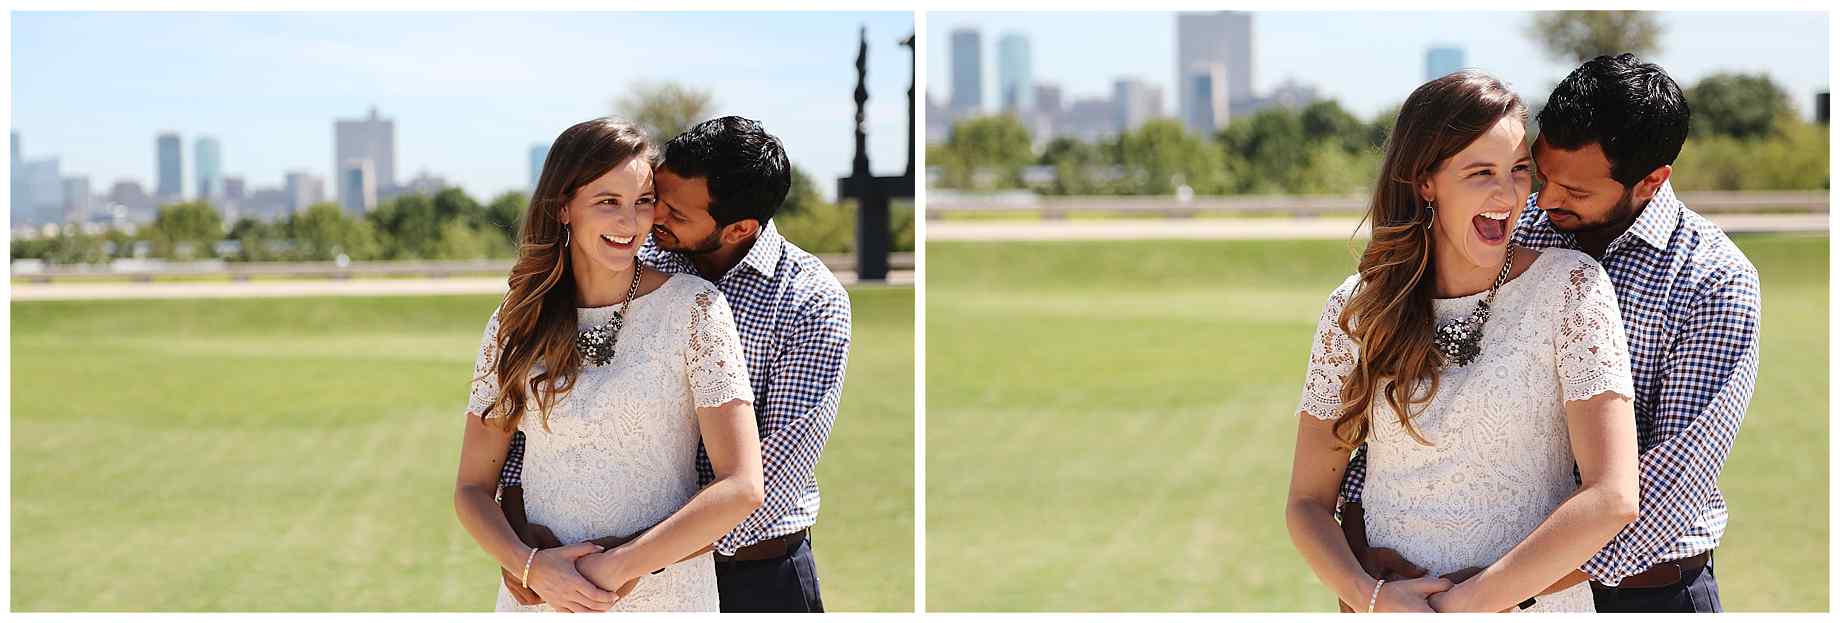 ft-worth-museum-engagement-photos-011